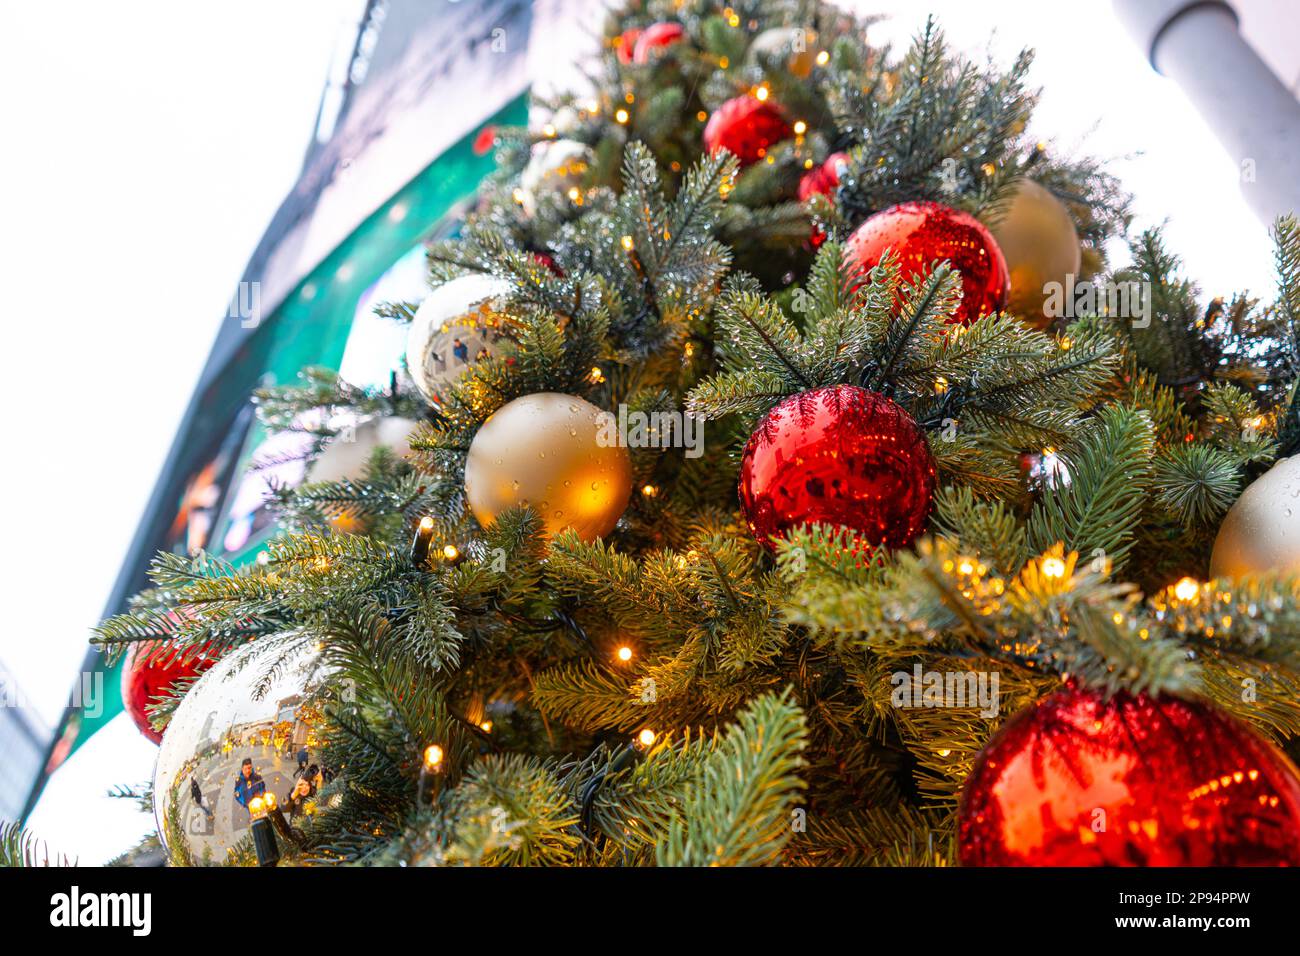 Decorated Christmas Tree in Rainy Day, Christmas Decorations, Shiny Garland on Green Branches, Blurred Xmas Background with Copy Space Stock Photo